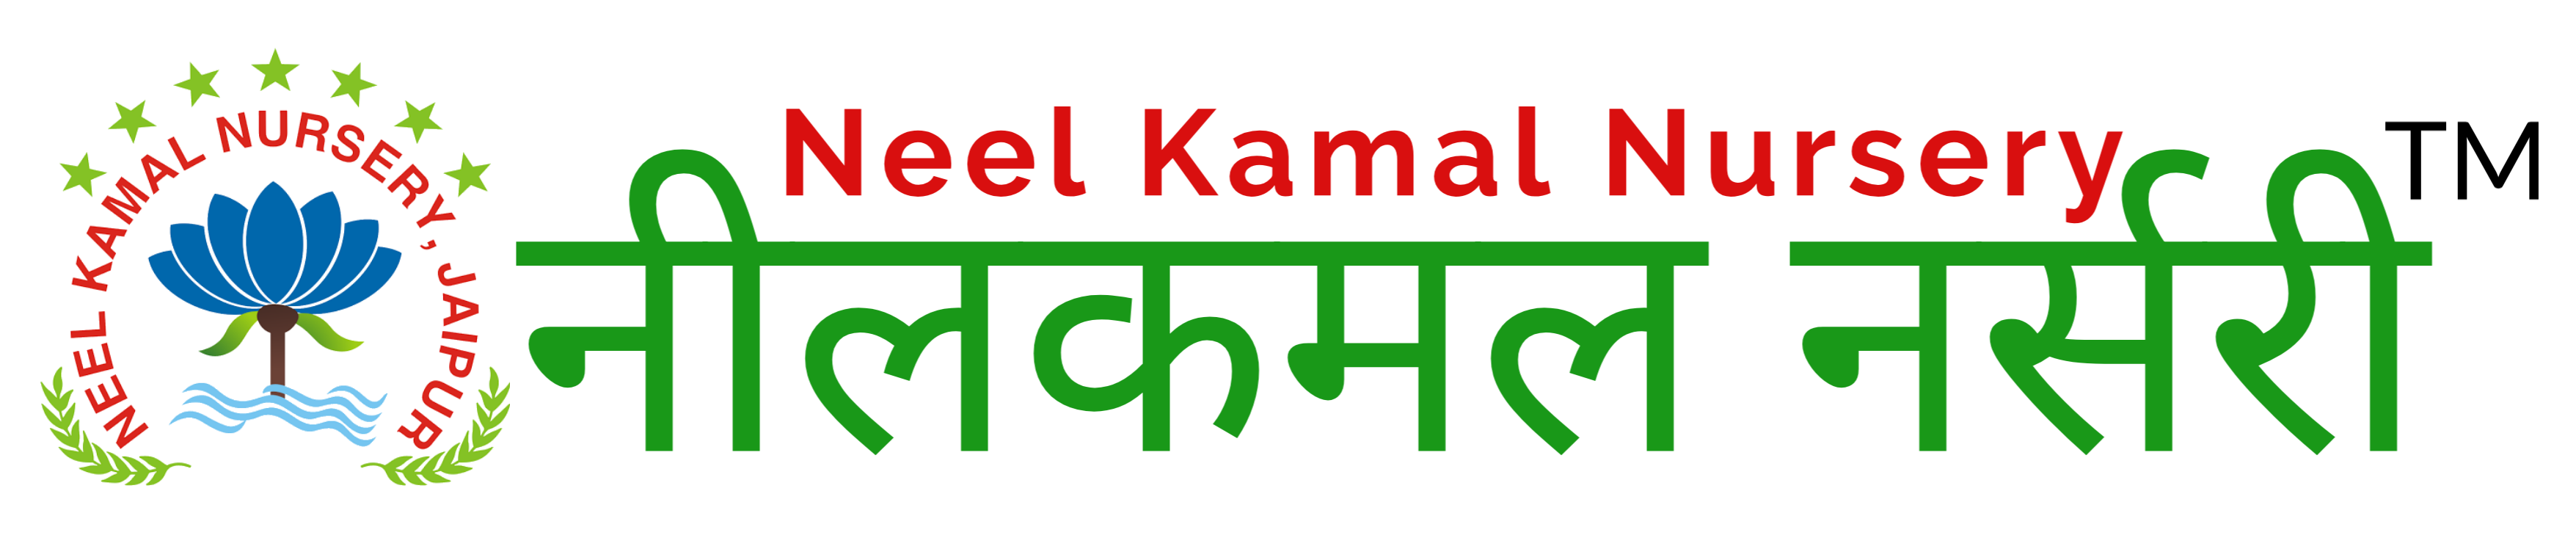 Neel Kamal Nursery | Call: 9351409212 Best Home Garden and Landscaping services in Jaipur